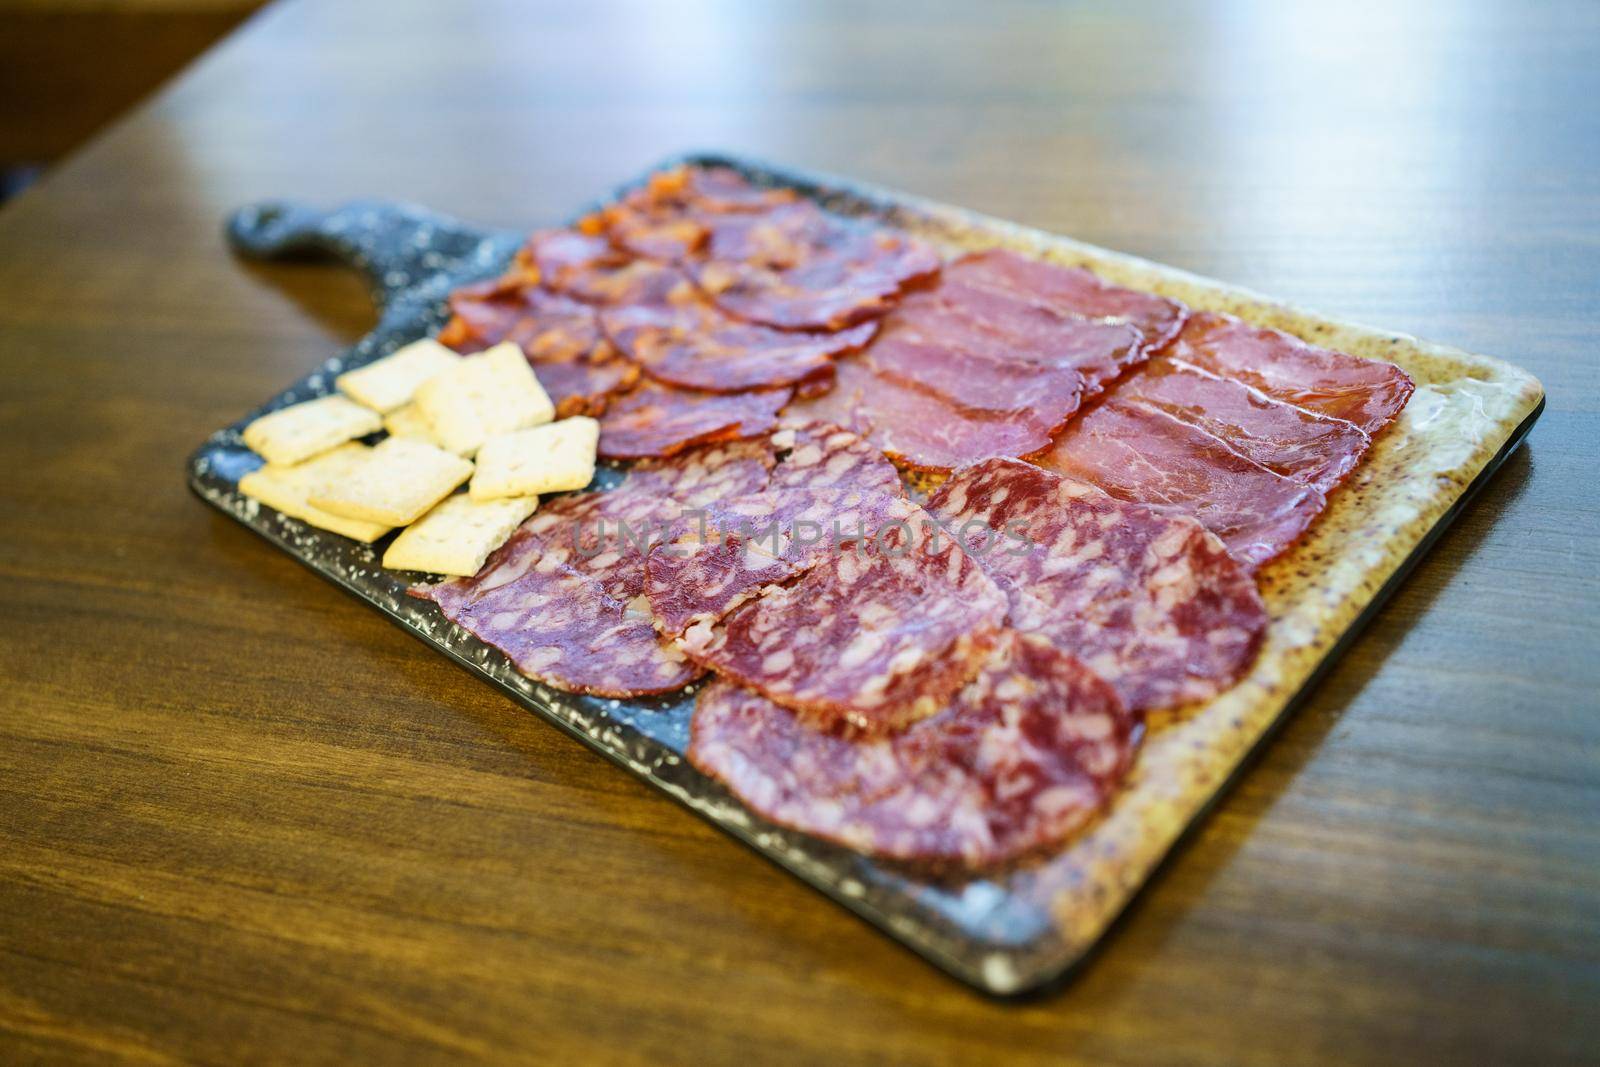 Iberian cured meats platter. A typical dish of Spanish cuisine. by javiindy